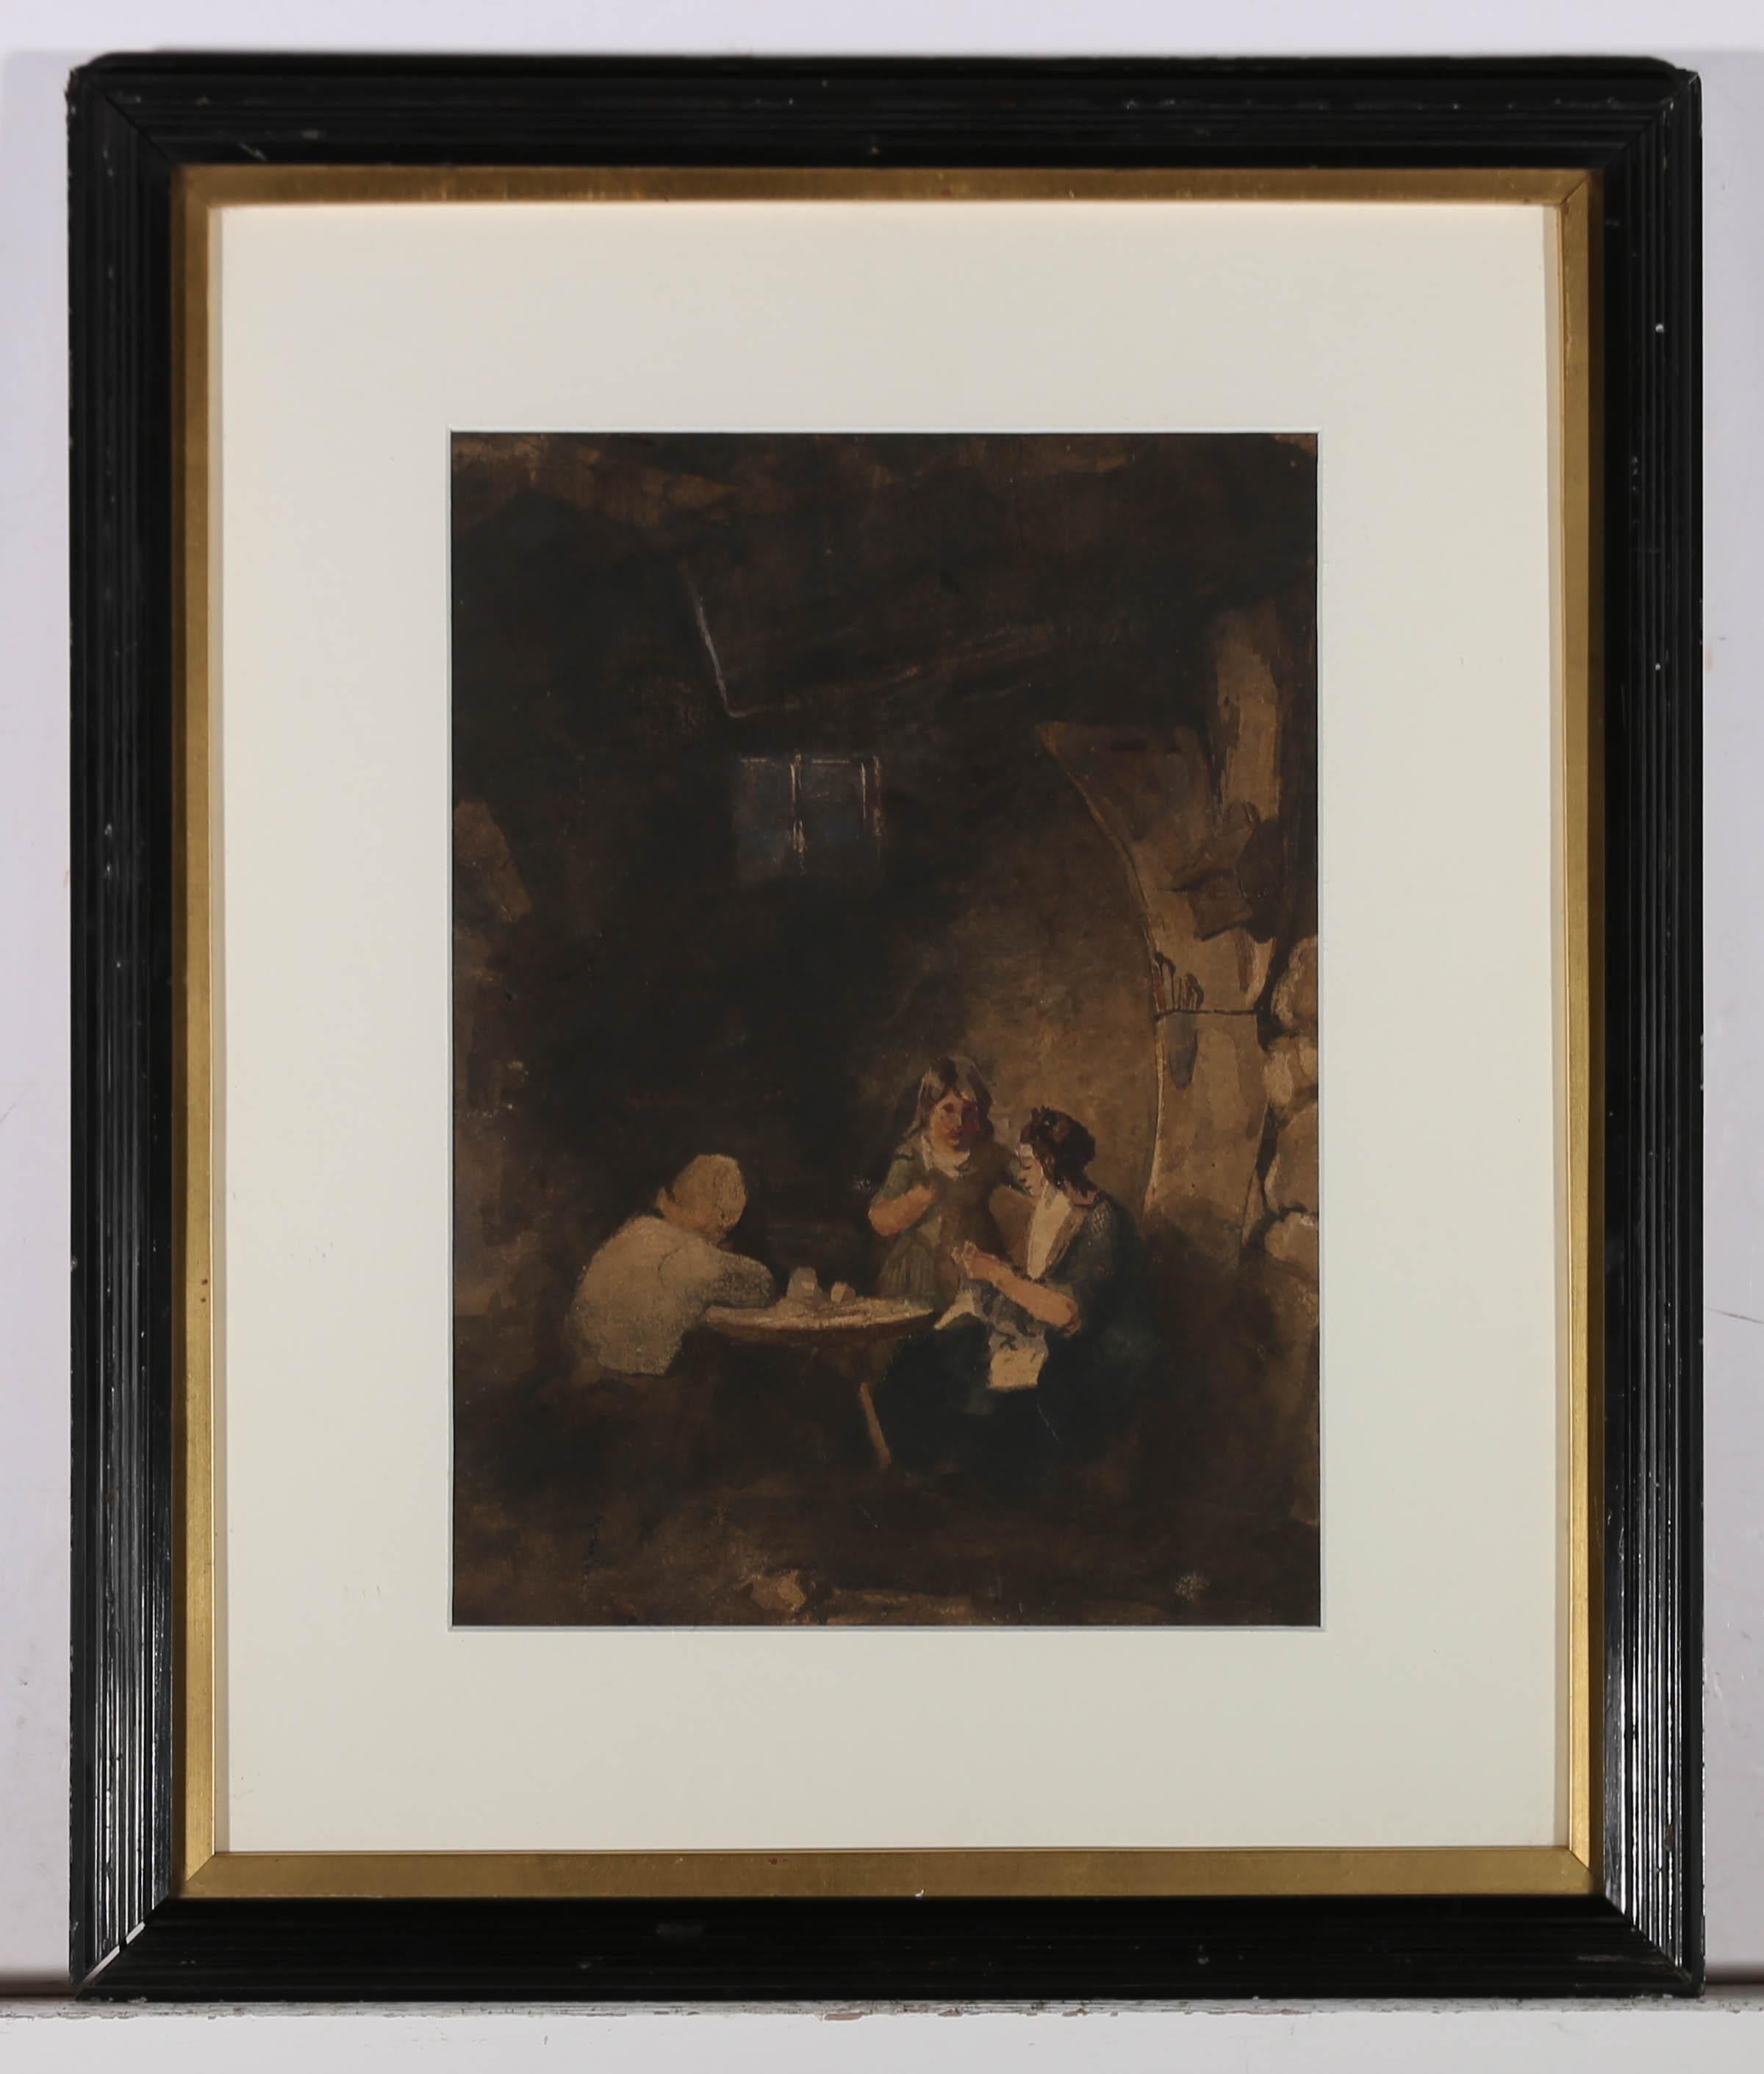 This charming 19th century watercolour depicts people gathered around a table. The soft light of the fire illuminates the three figures who sew and talk into the night. The motif has a strong resemblance to the work of Dutch painter Joseph Israels